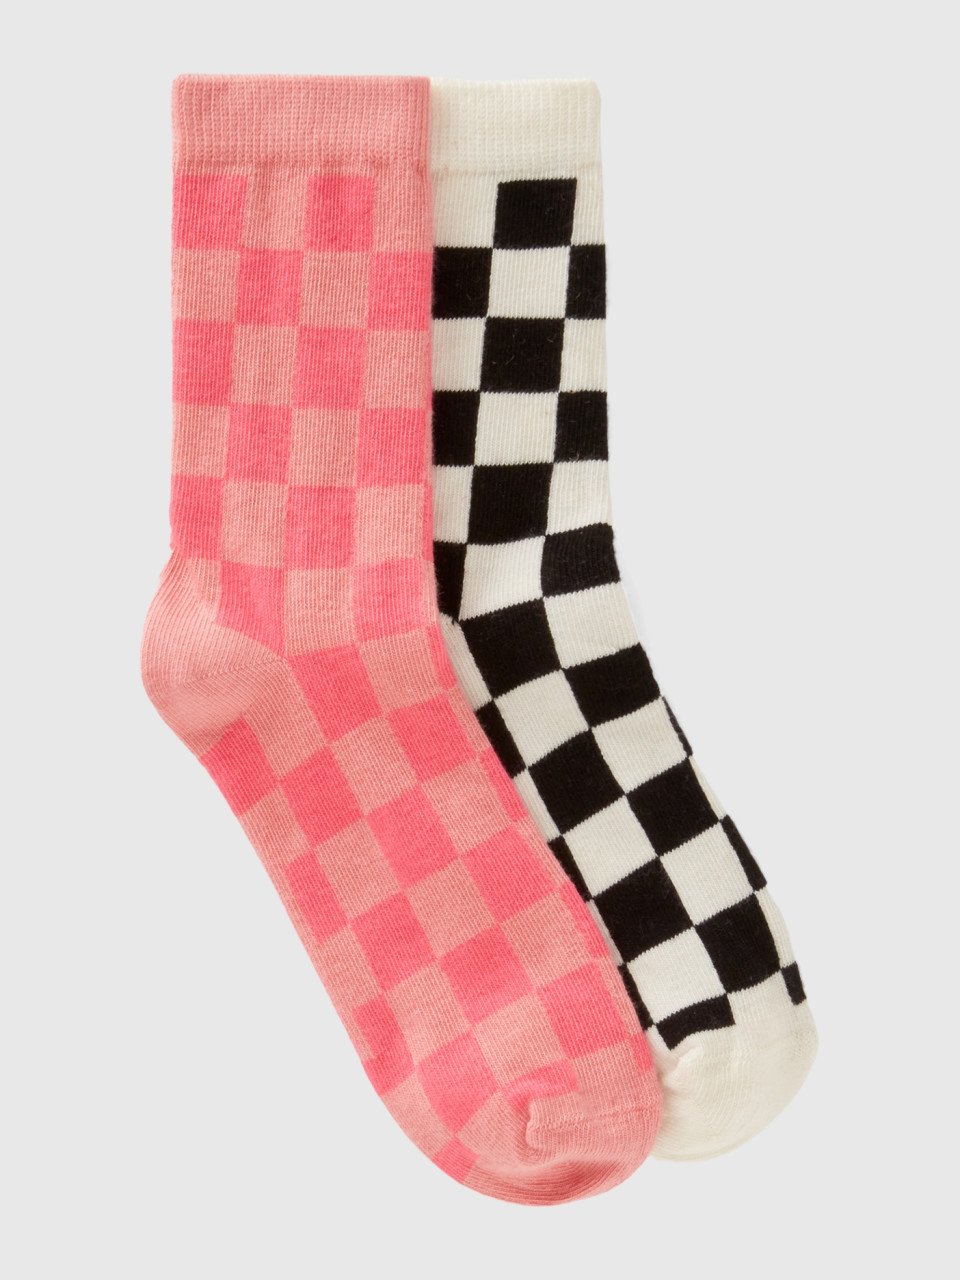 Benetton, Two Pairs Of Checkered Socks, Multi-color, Kids